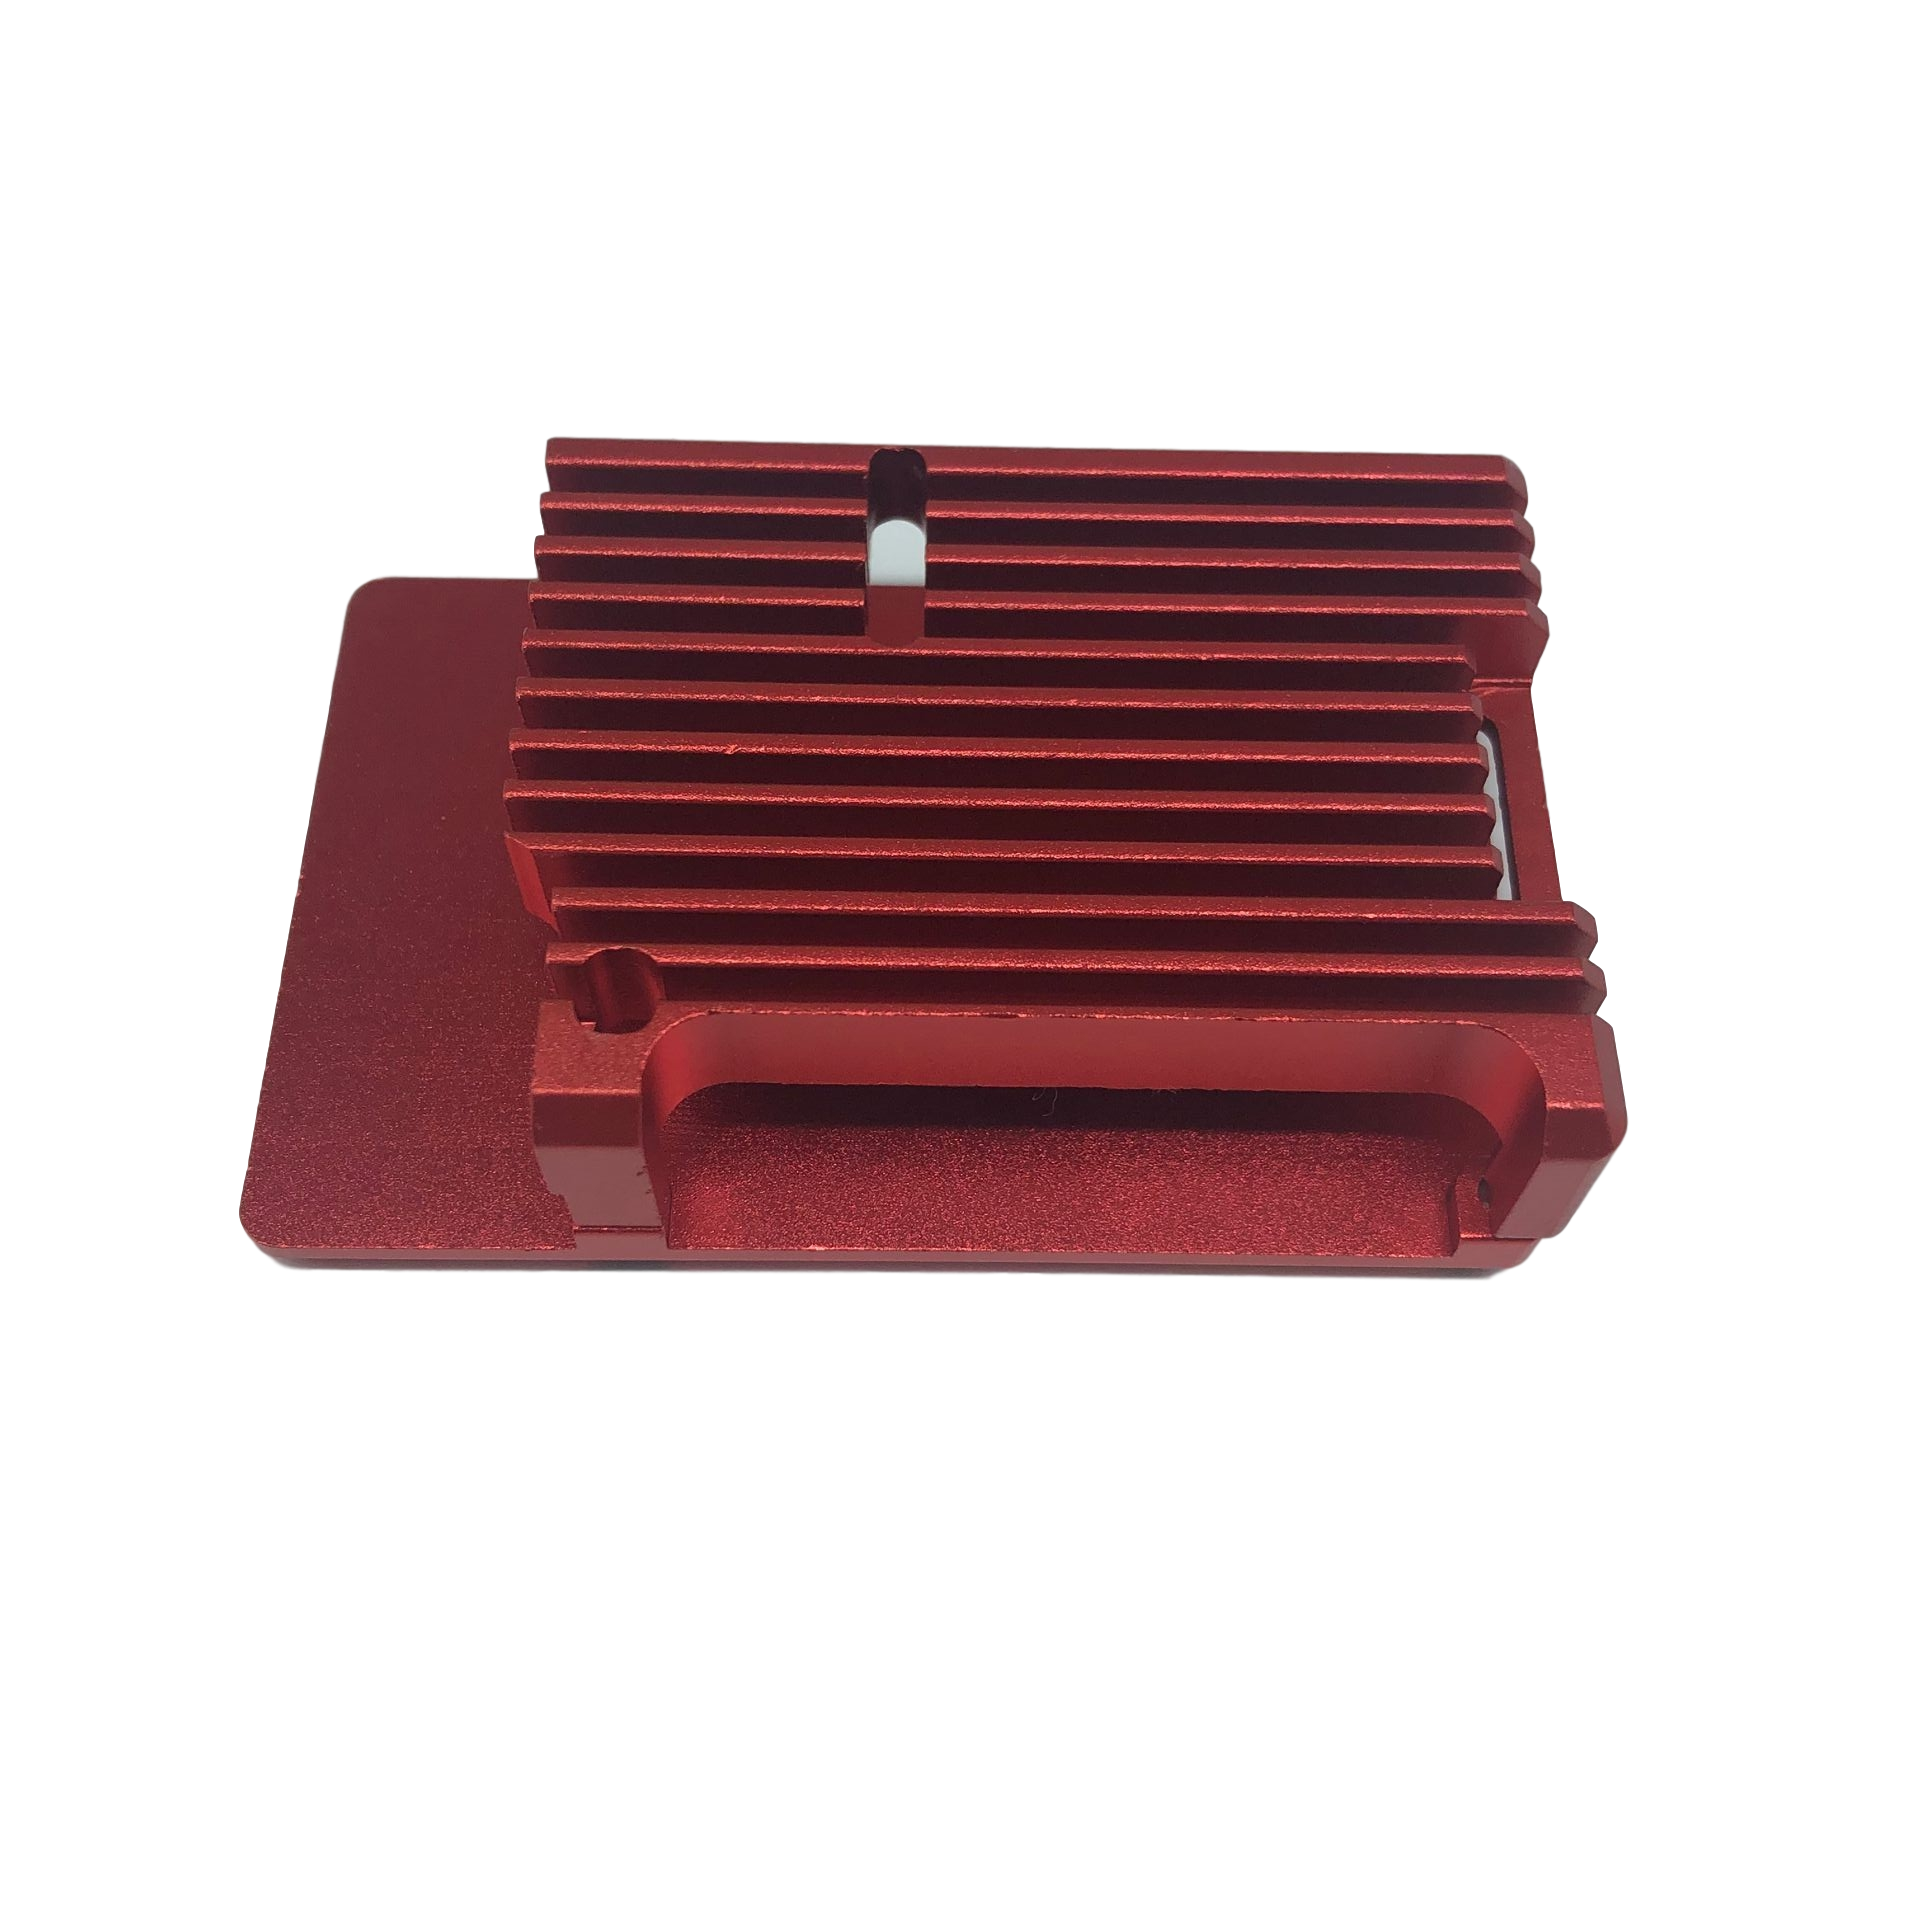 Reinforced-Aluminum-Alloy-Protective-Case-Armor-Cover-Heat-Dissipation-for-Raspberry-Pi-4B-1738903